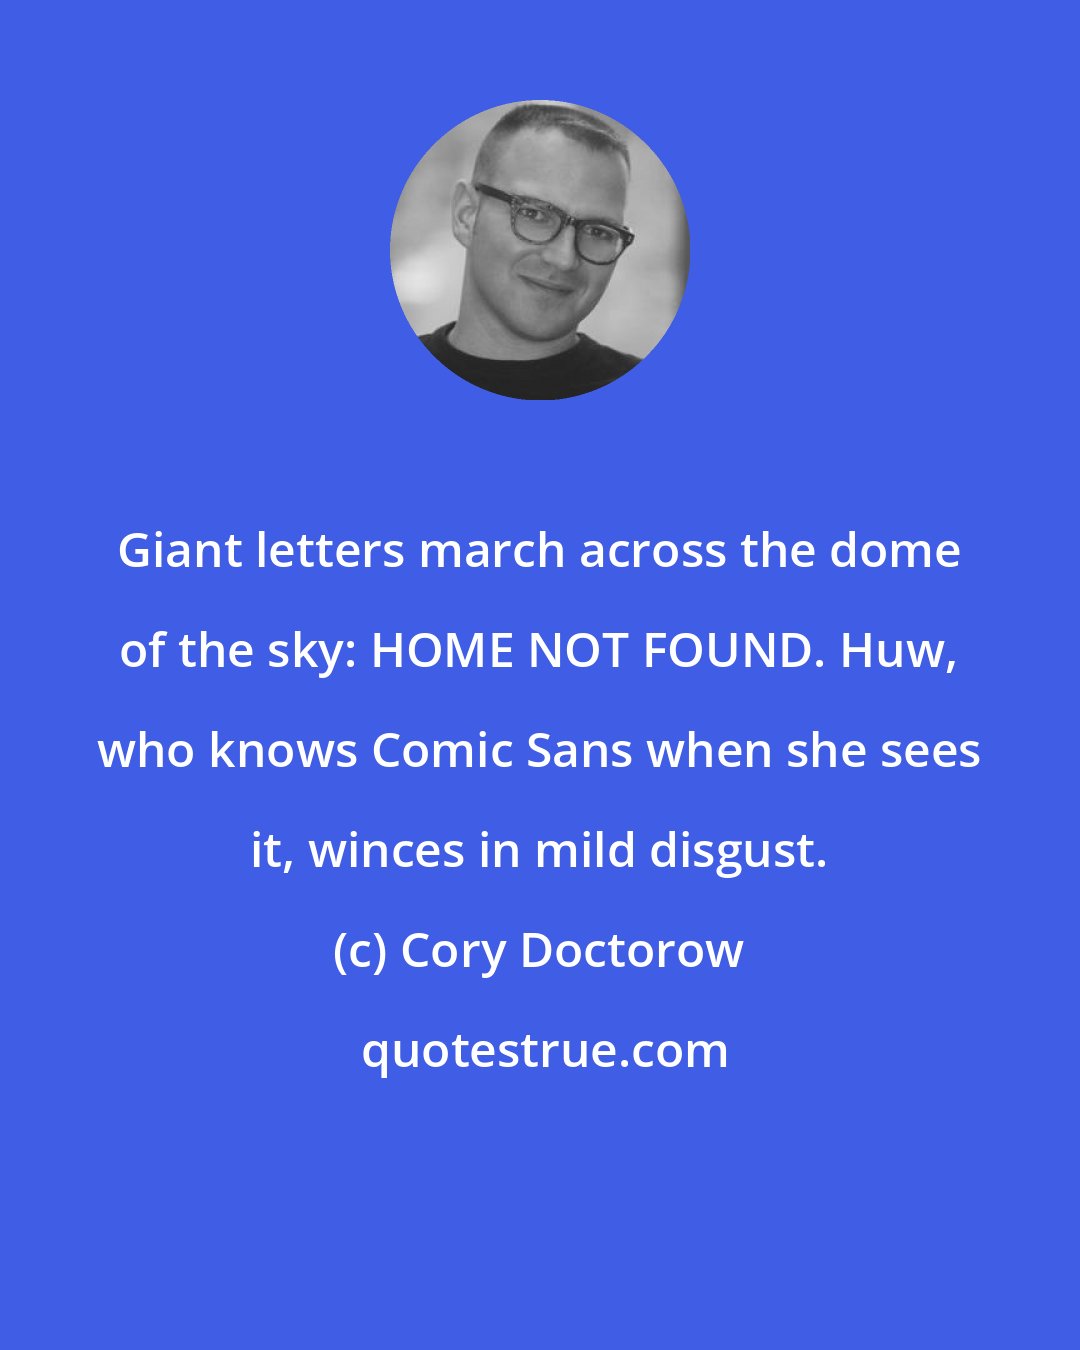 Cory Doctorow: Giant letters march across the dome of the sky: HOME NOT FOUND. Huw, who knows Comic Sans when she sees it, winces in mild disgust.